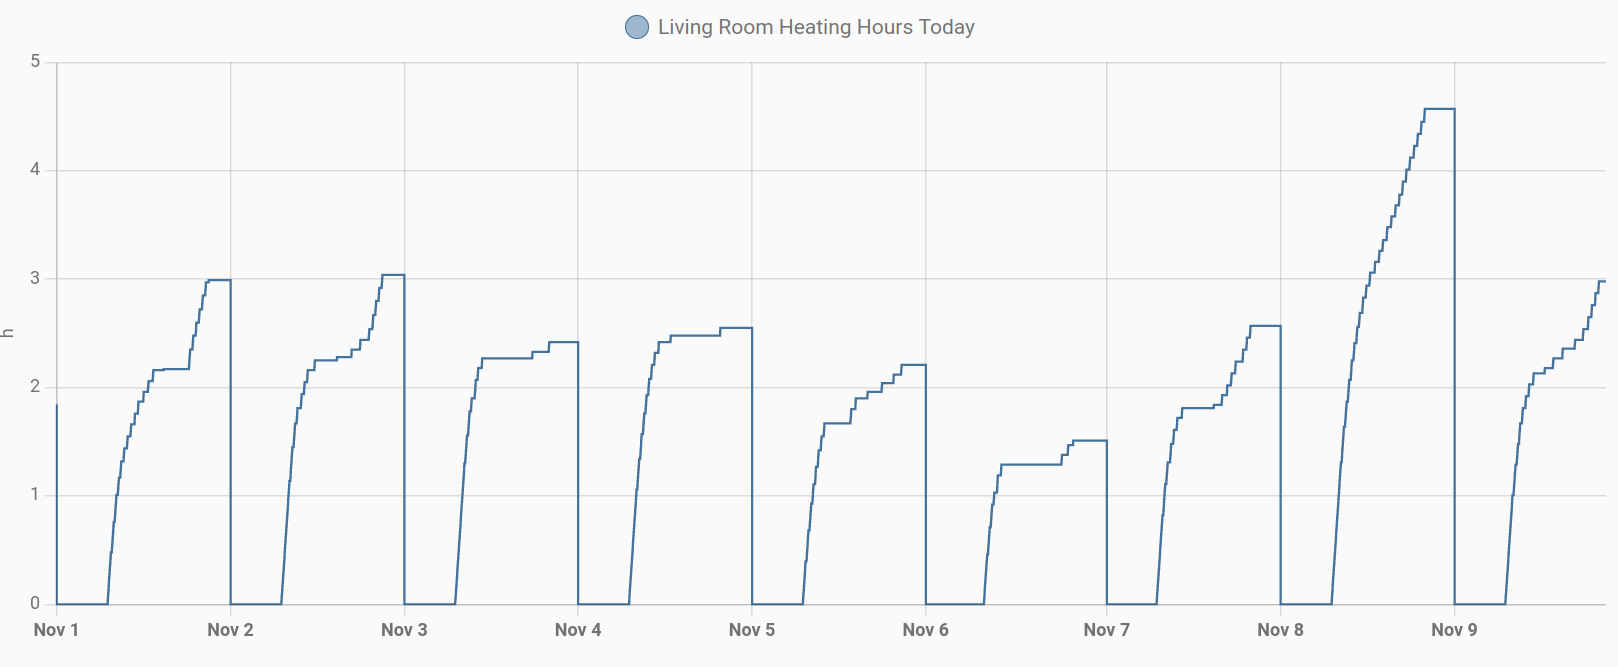 Heating Hours History in Home Assistant